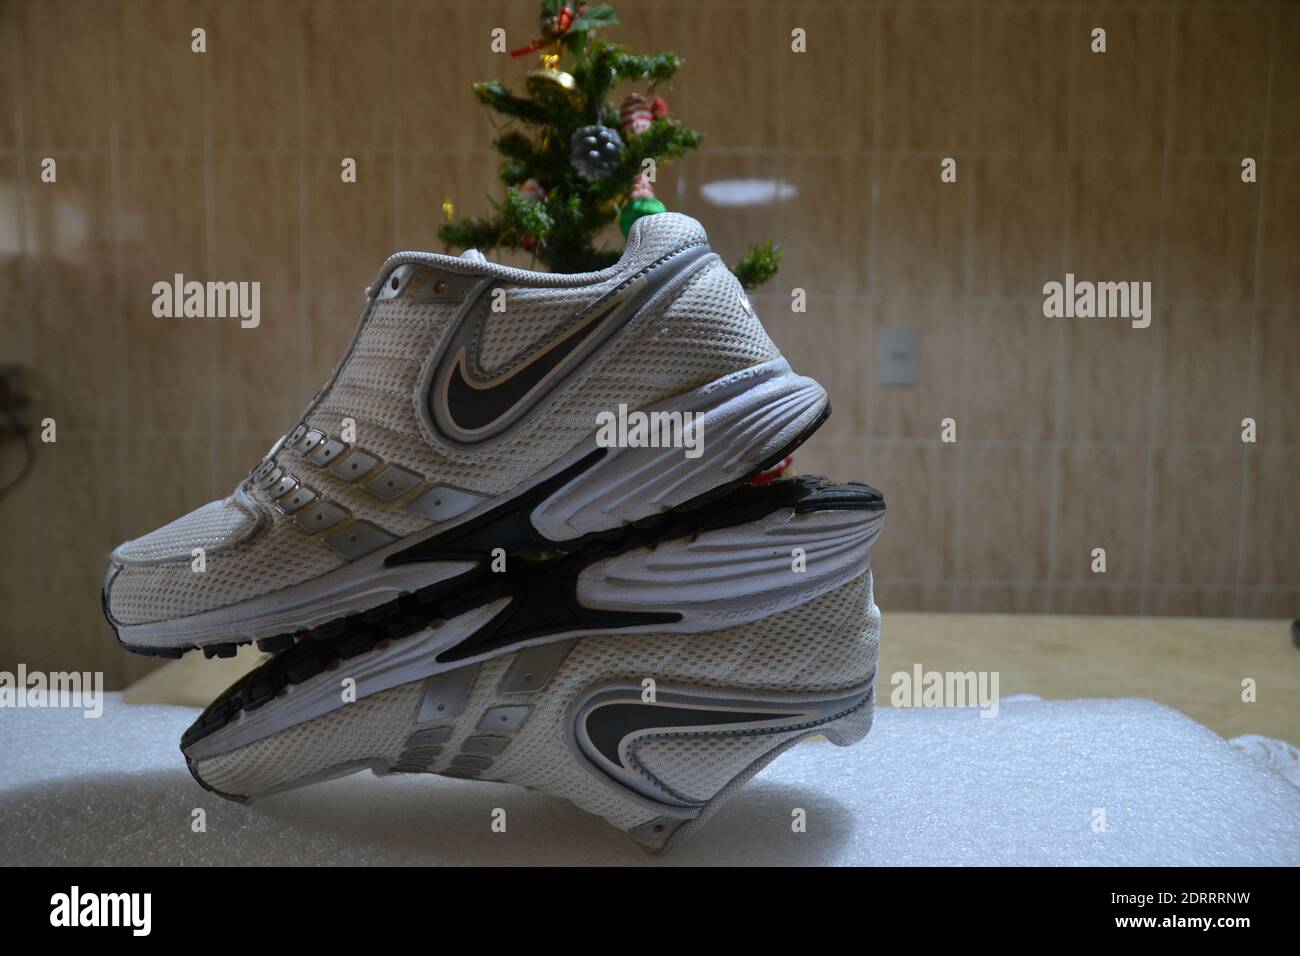 Christmas Shoes High Resolution Stock Photography and Images - Alamy